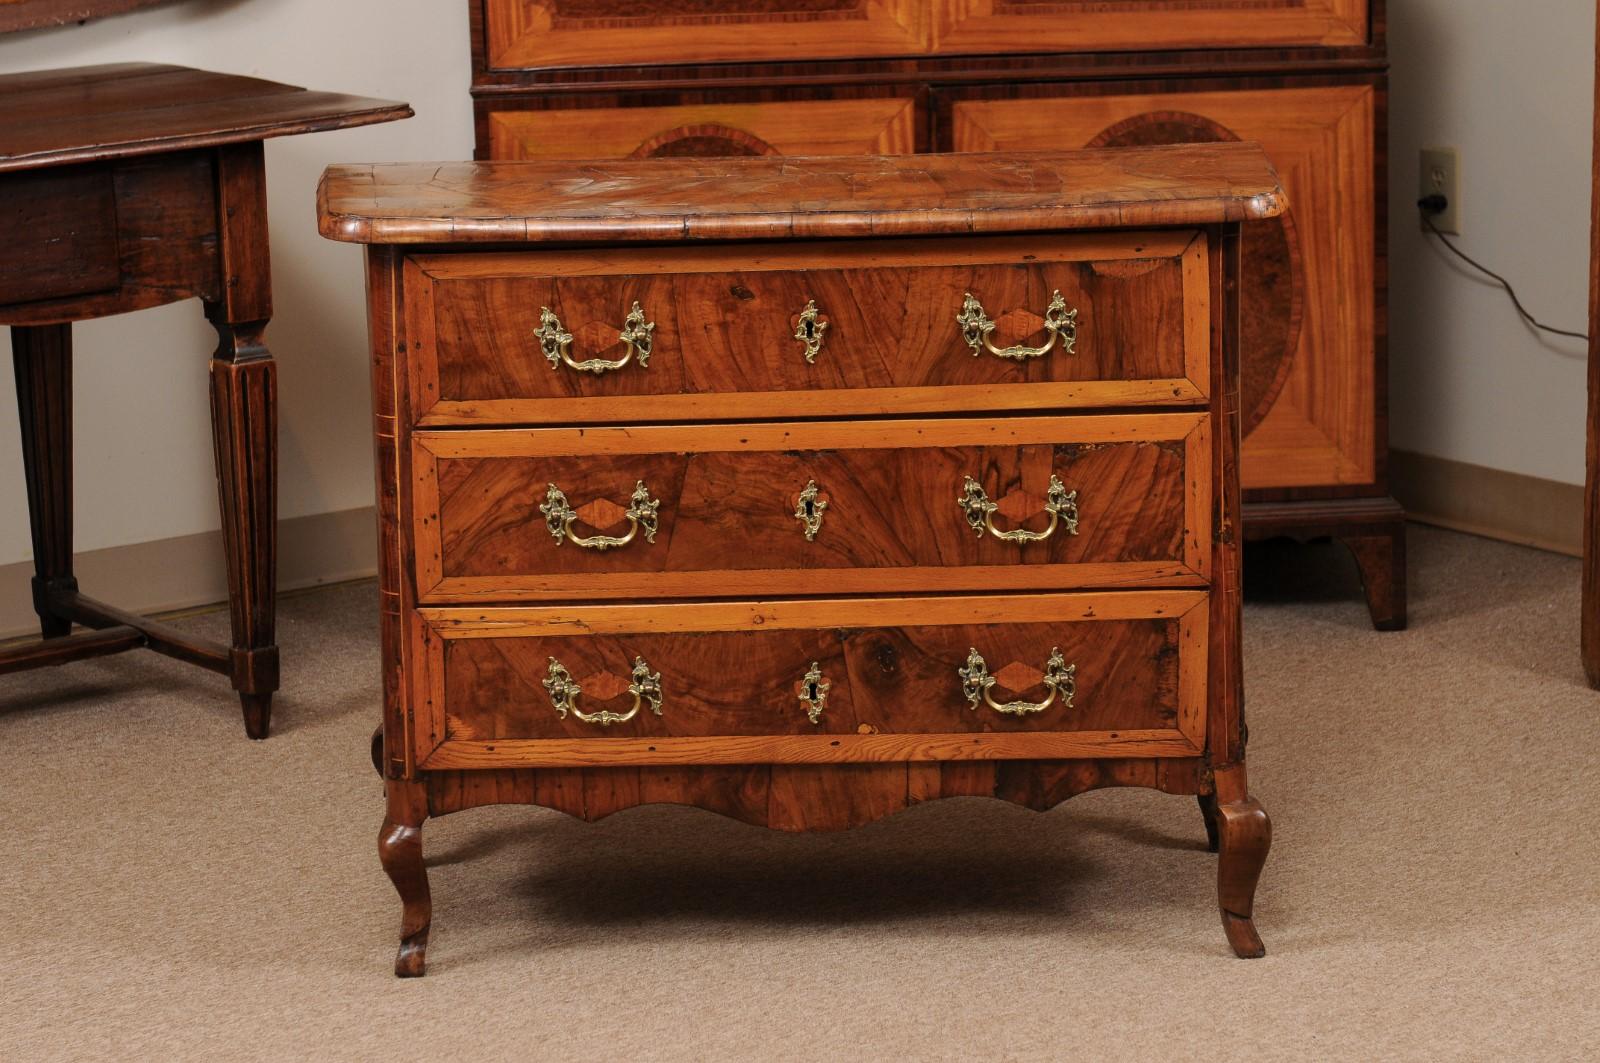 18th Century Italian 3-Drawer Commode in Olivewood with Cabriole Legs For Sale 11